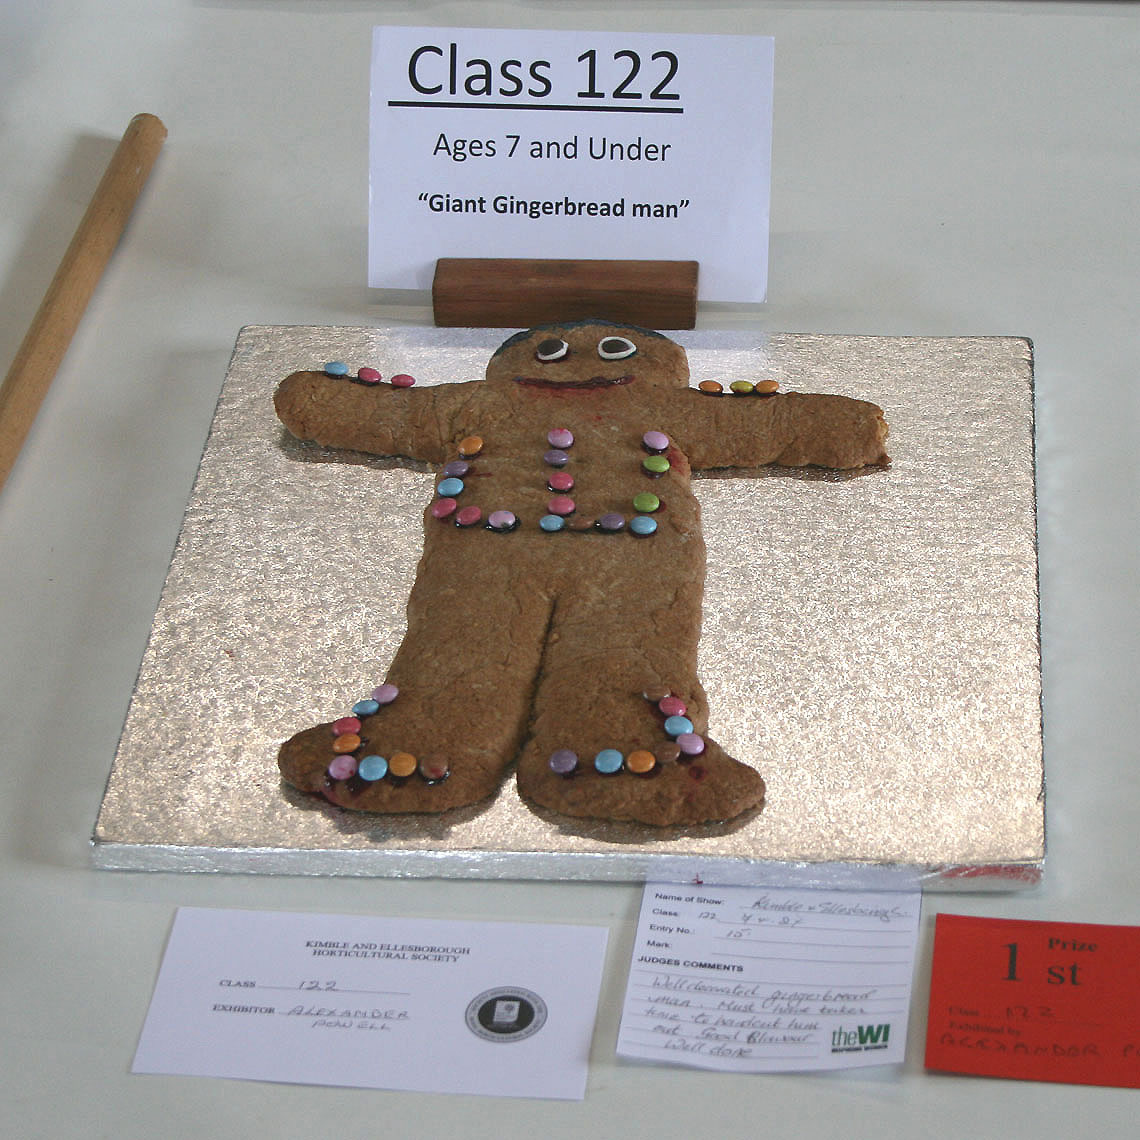 Class 122 - Giant Gingerbread Person